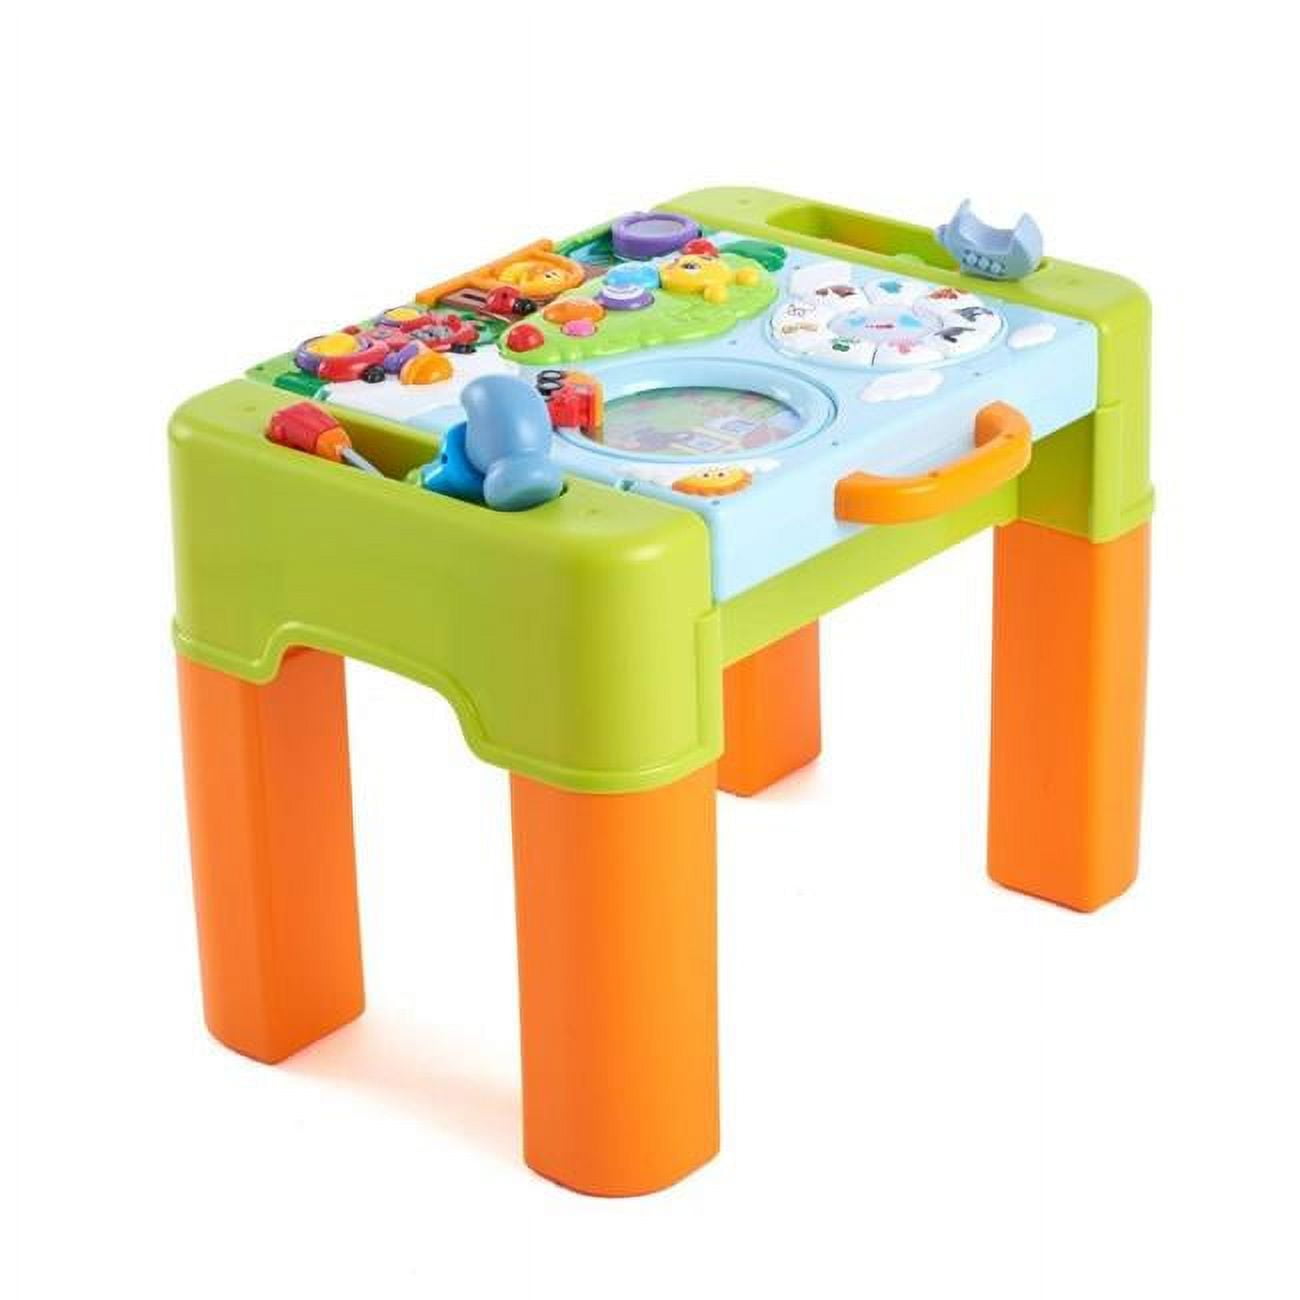 Play & Learning Activity Desk 6 In 1 Game Table Activity Desk